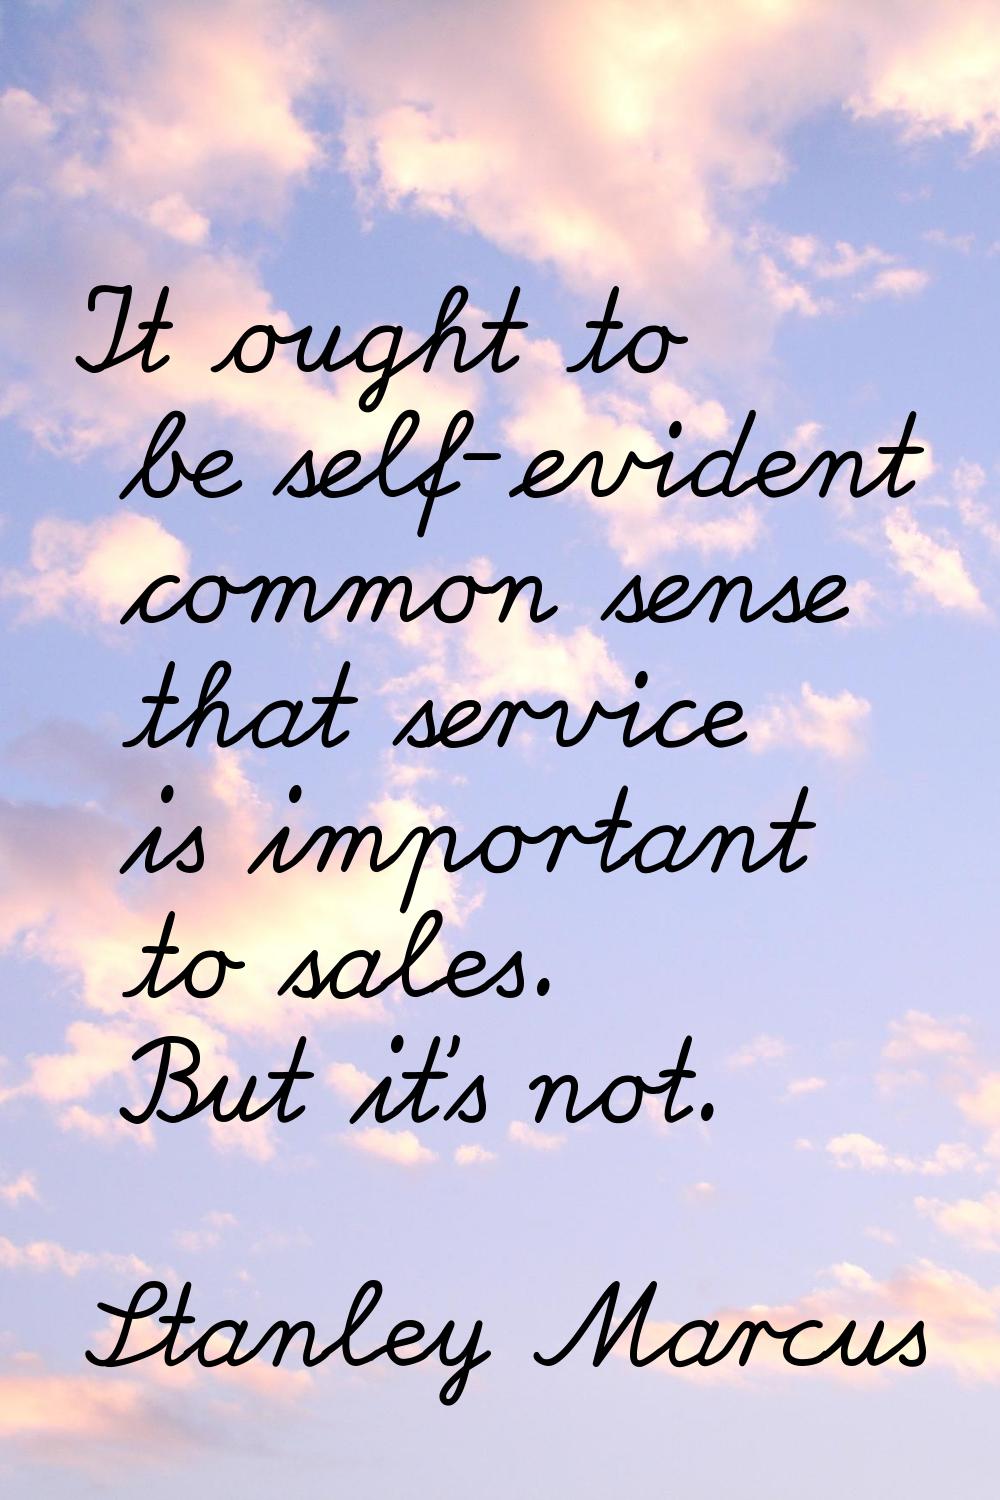 It ought to be self-evident common sense that service is important to sales. But it's not.